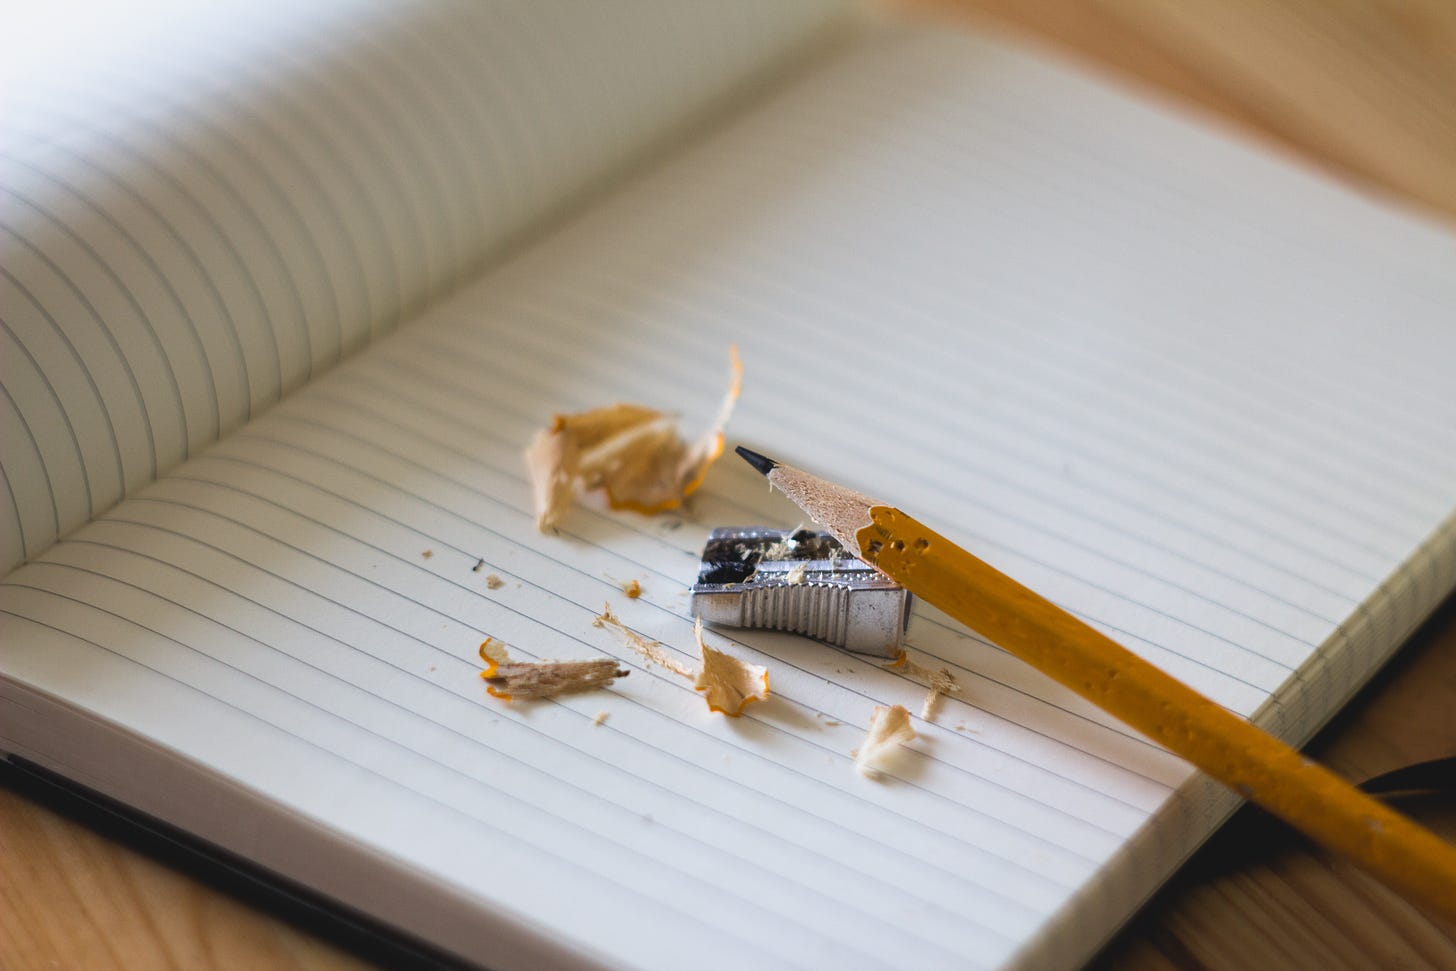 Pencil shavings and a pencil sharpener, messily placed on a blank notebook page